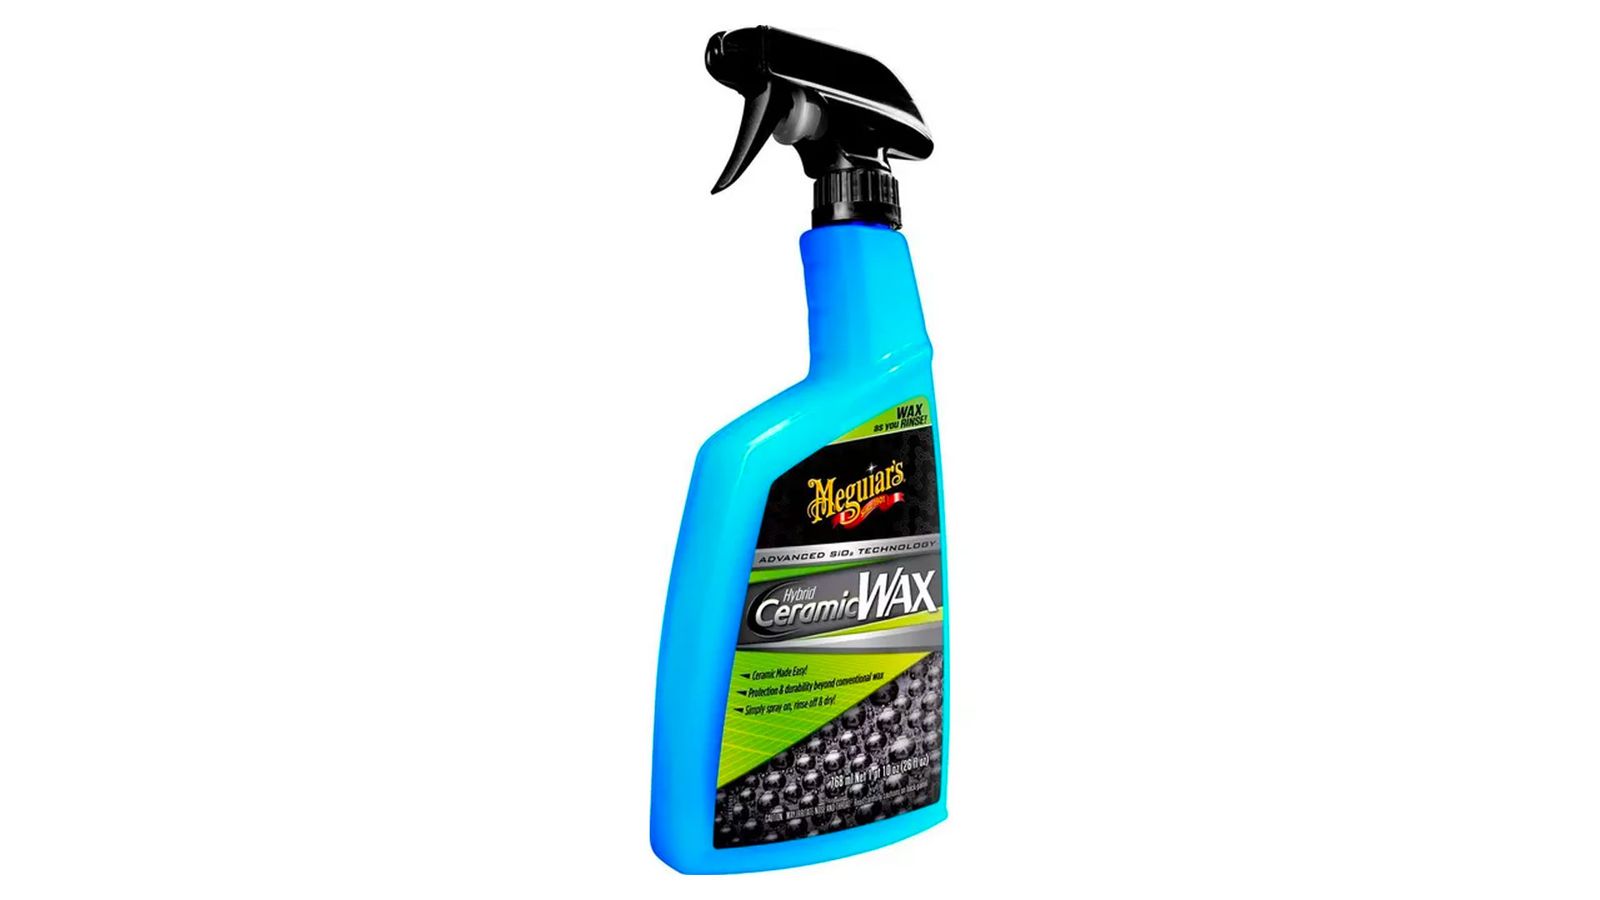 Meguiar's Hybrid Ceramic Wax product image of a blue spray bottle of wax with a green and black label.